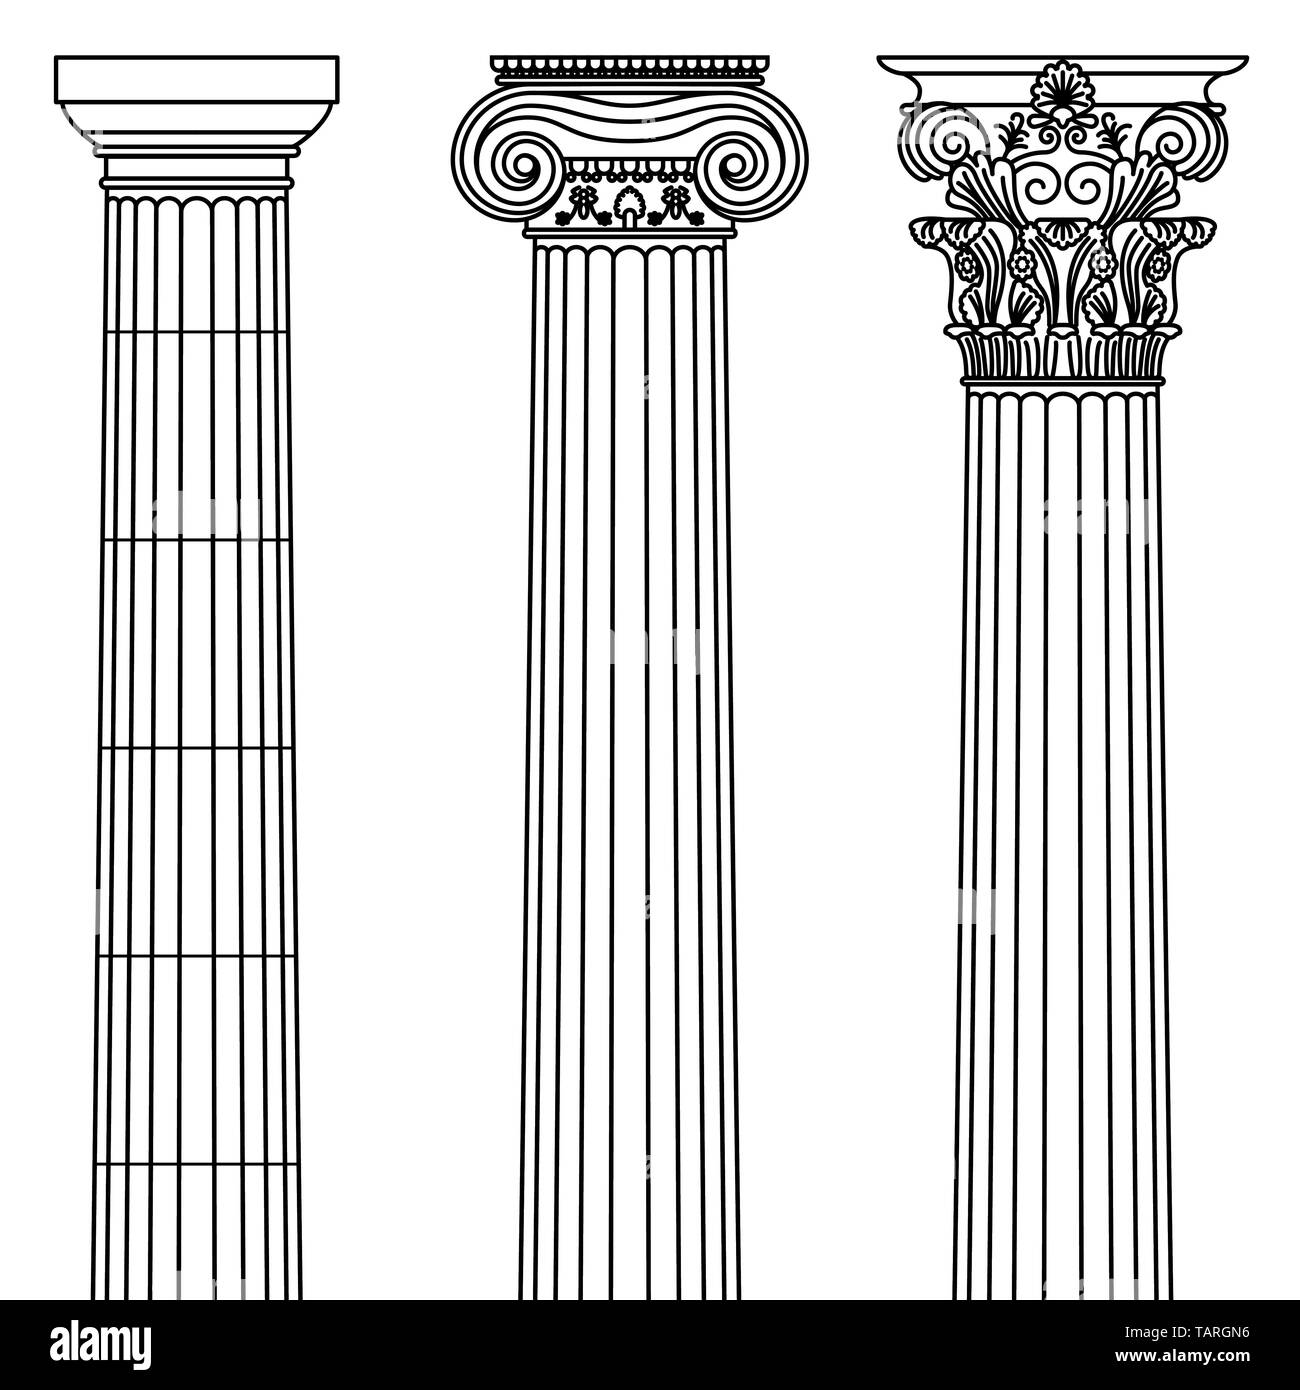 A set of antique Greek and historical columns with Ionic, Doric and Corinthian capitals Vector line illustration. Stock Vector